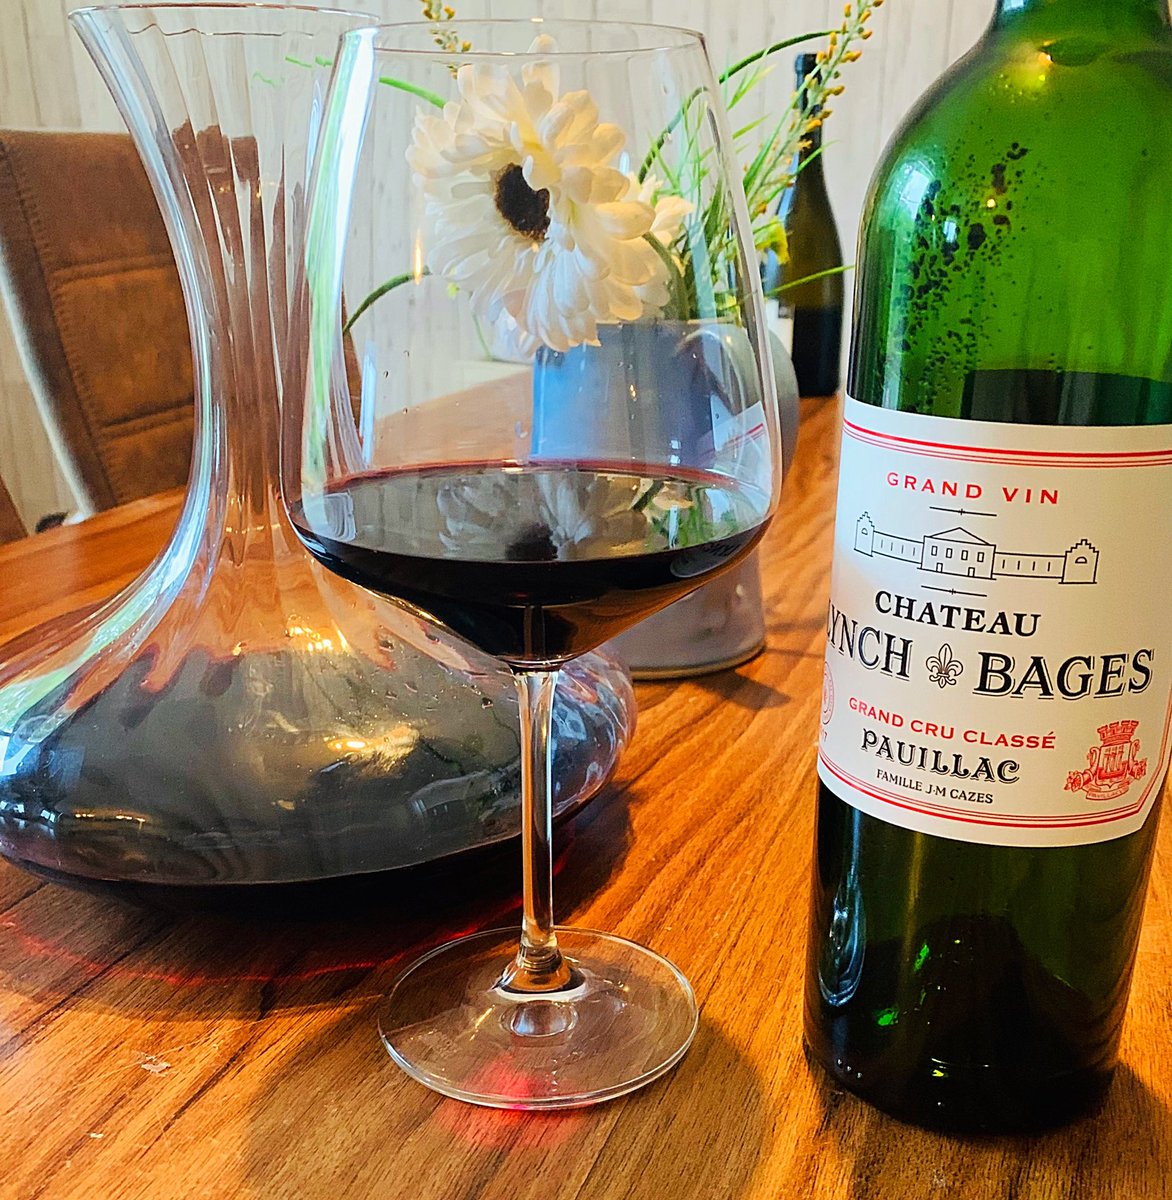 Celebrating one more spin around the sun with a very nice pauillac! #chateaulynchbages #grandcruclasse #vindefrance #oldman